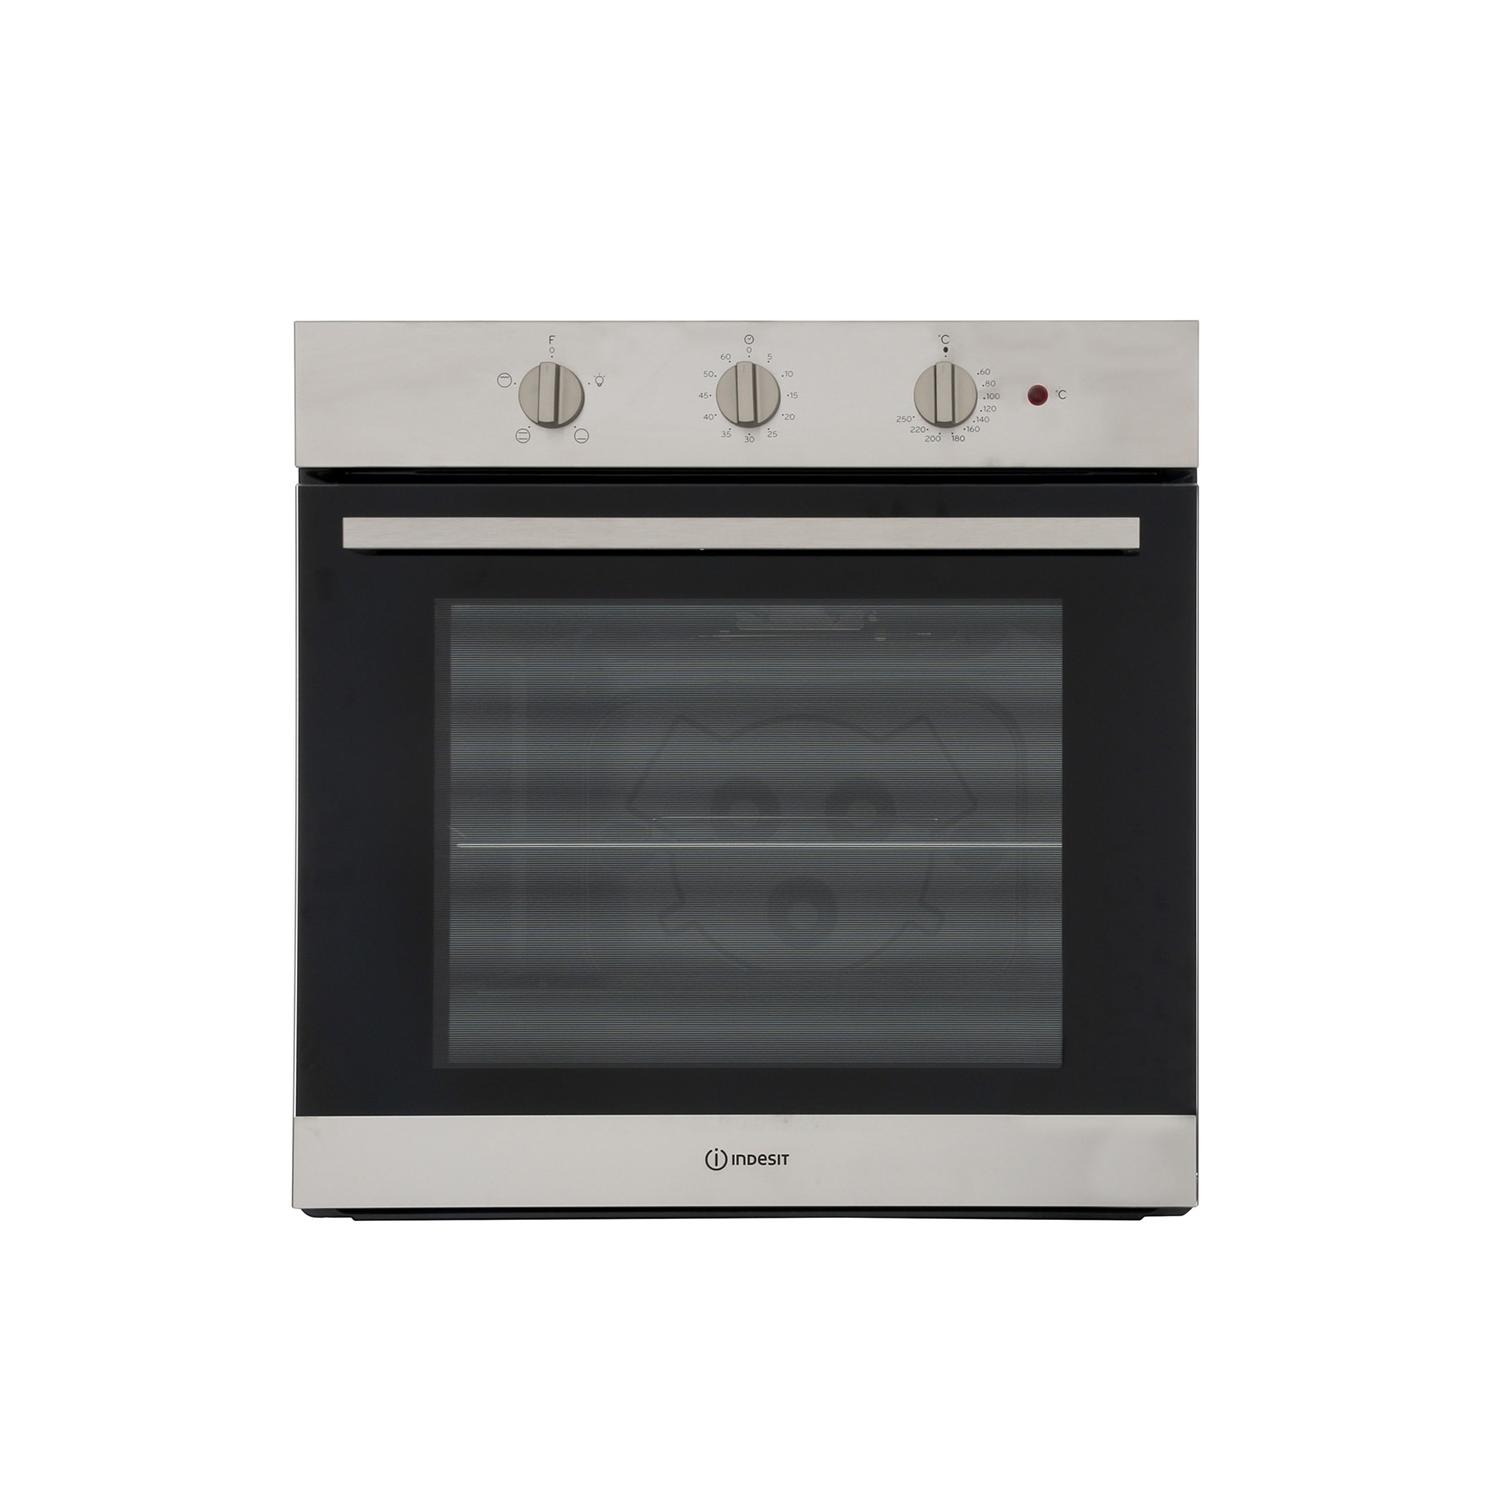 Indesit Built In Single Oven - Stainless Steel - 0